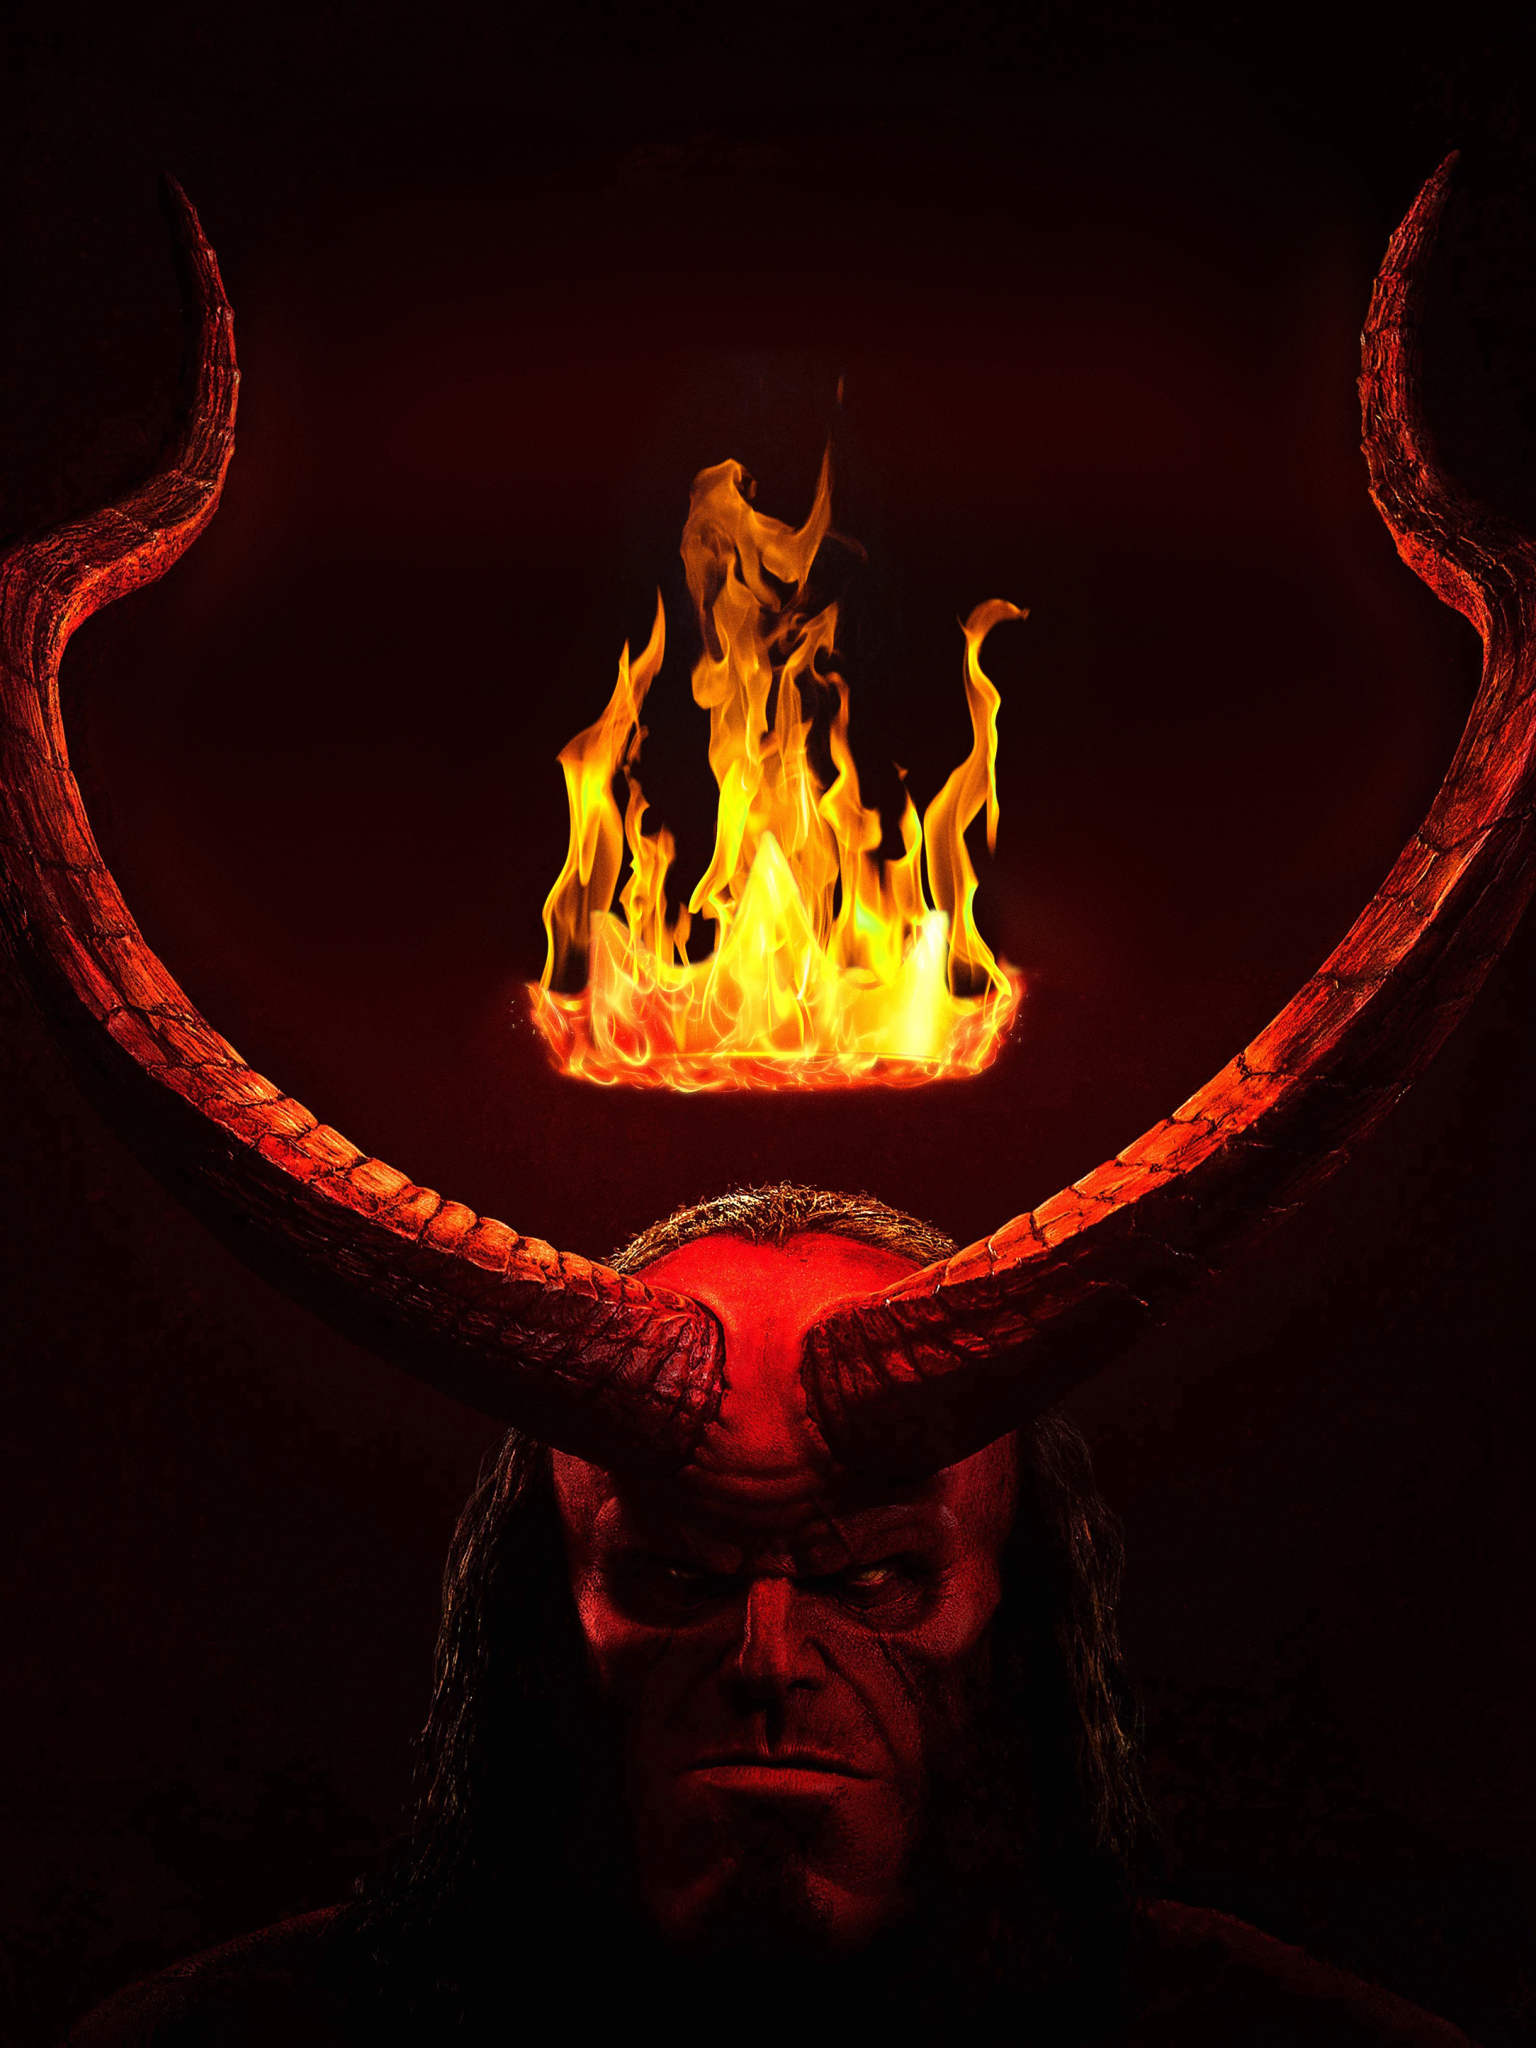 1536x2048 Hellboy 2019 Movie Poster 1536x2048 Resolution ... from images.wa...